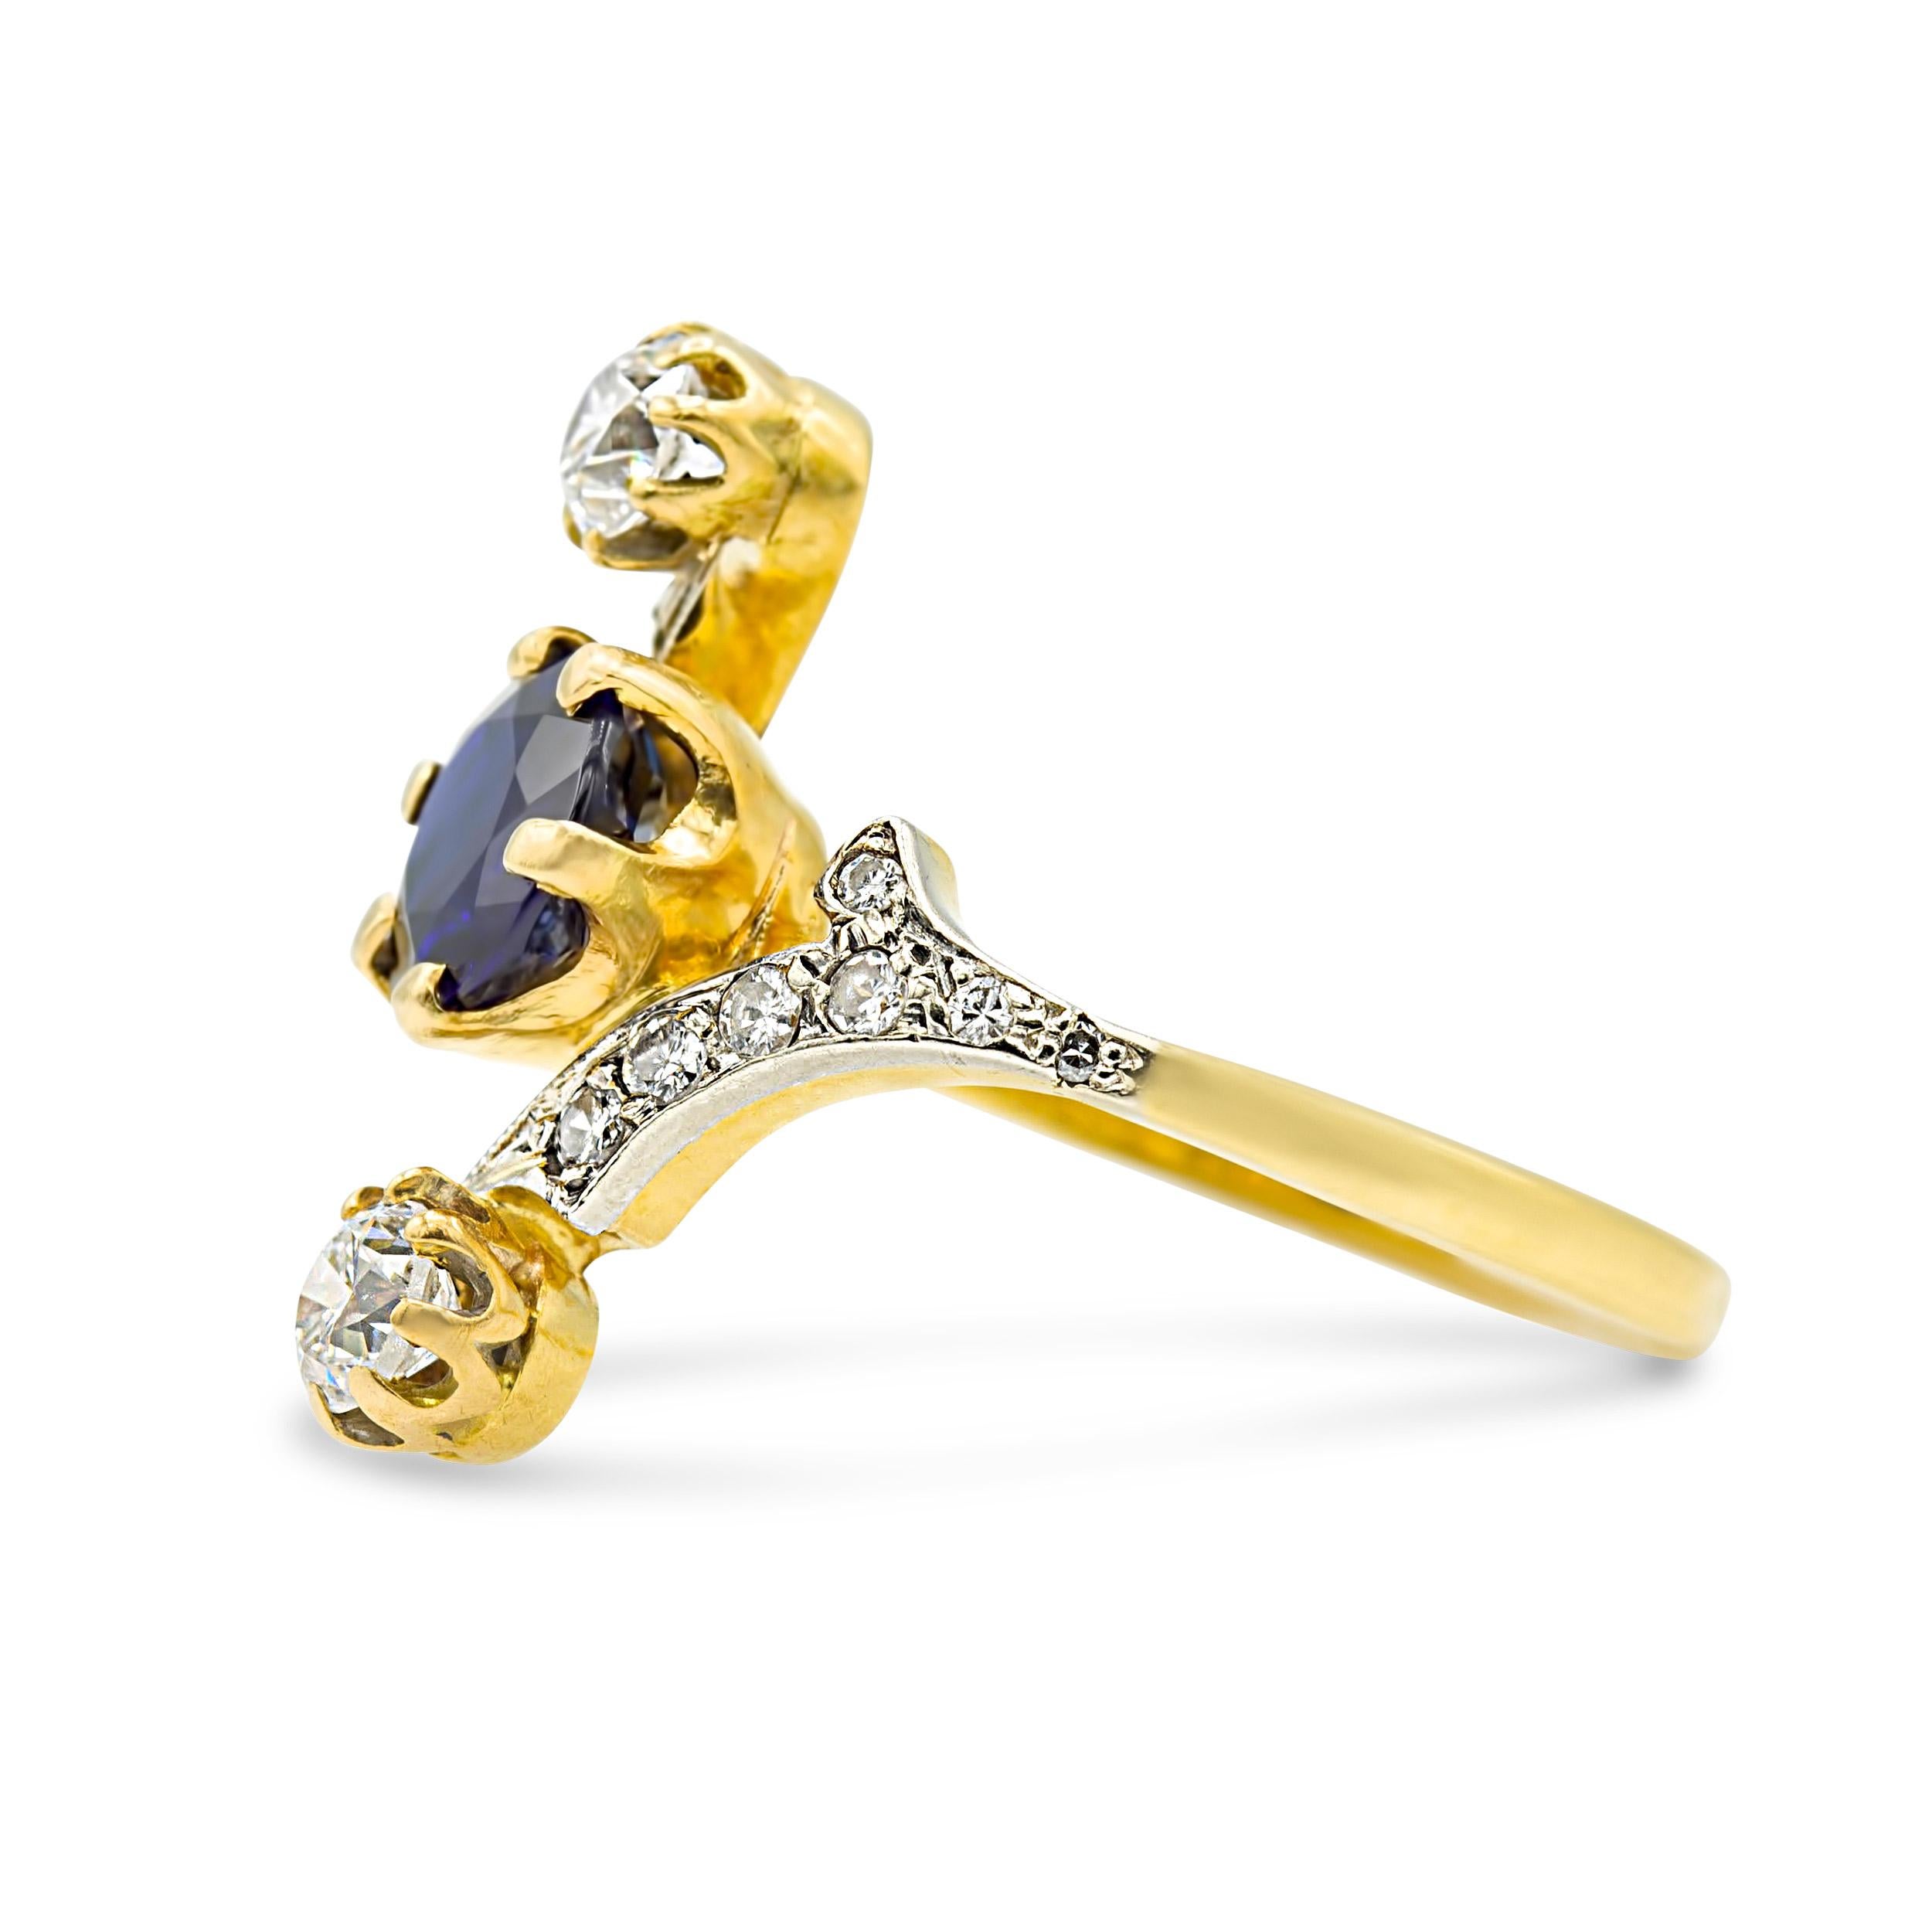 Centered by a velvety blue Burma Sapphire, this French Belle Epoque era cocktail ring is proudly stamped on its shank with a French hallmark. The rich-colored sapphire is certified by the American Gemological Laboratory as unheated and of Burmese